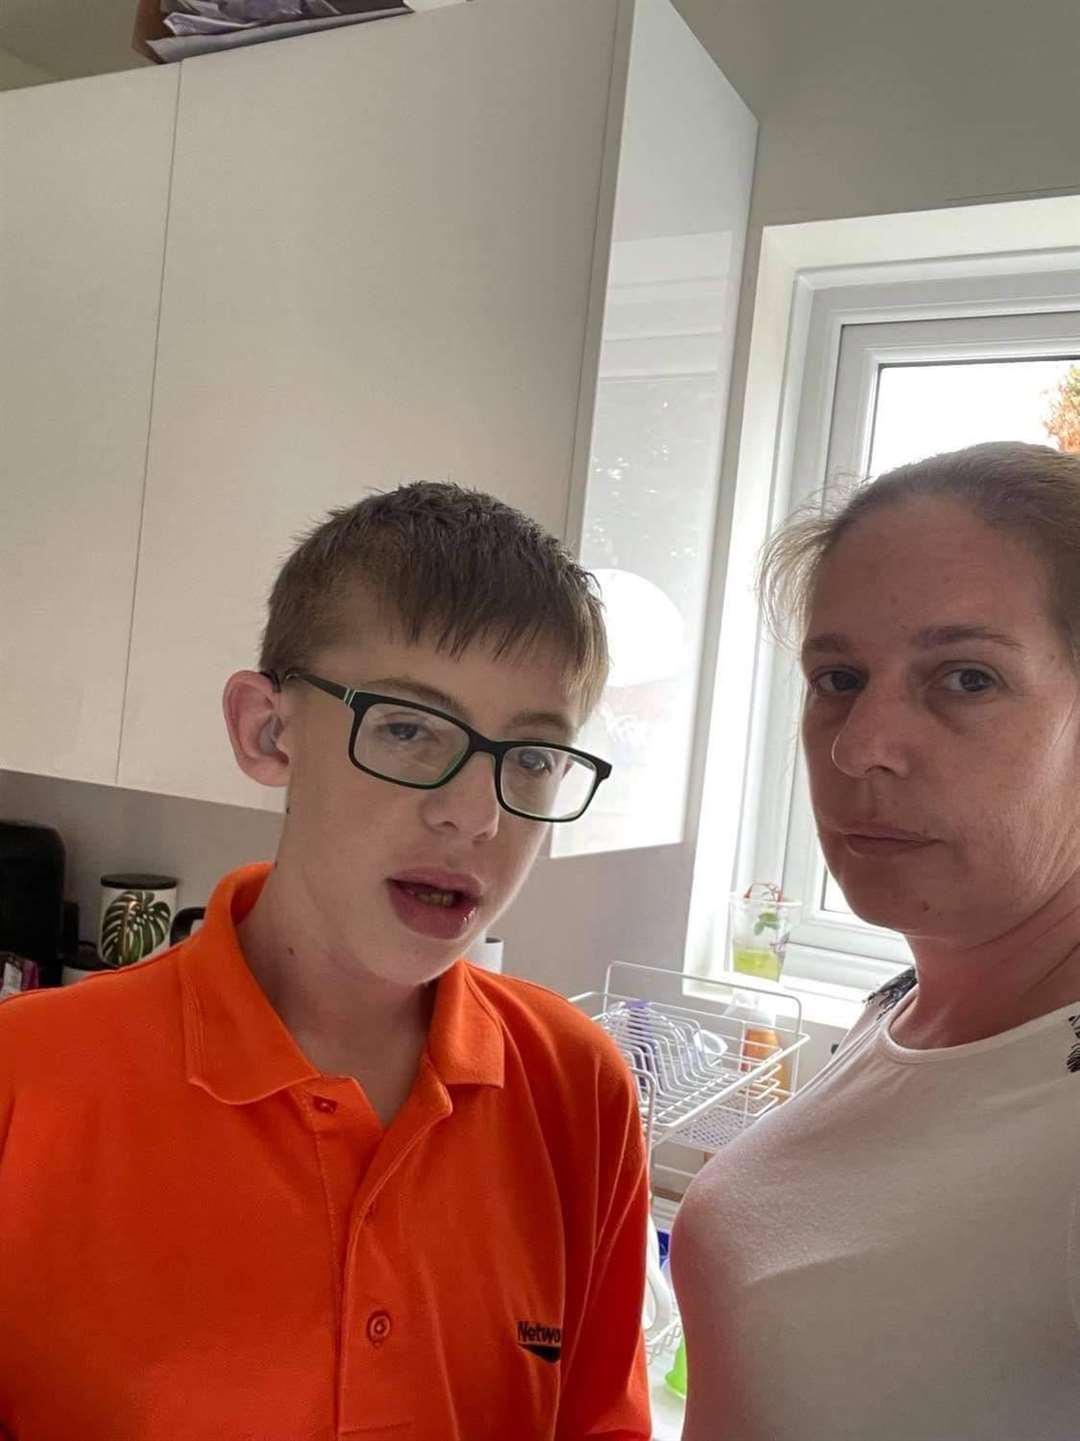 Hayden, who is diagnosed with a rare disease, and his mother Hayley